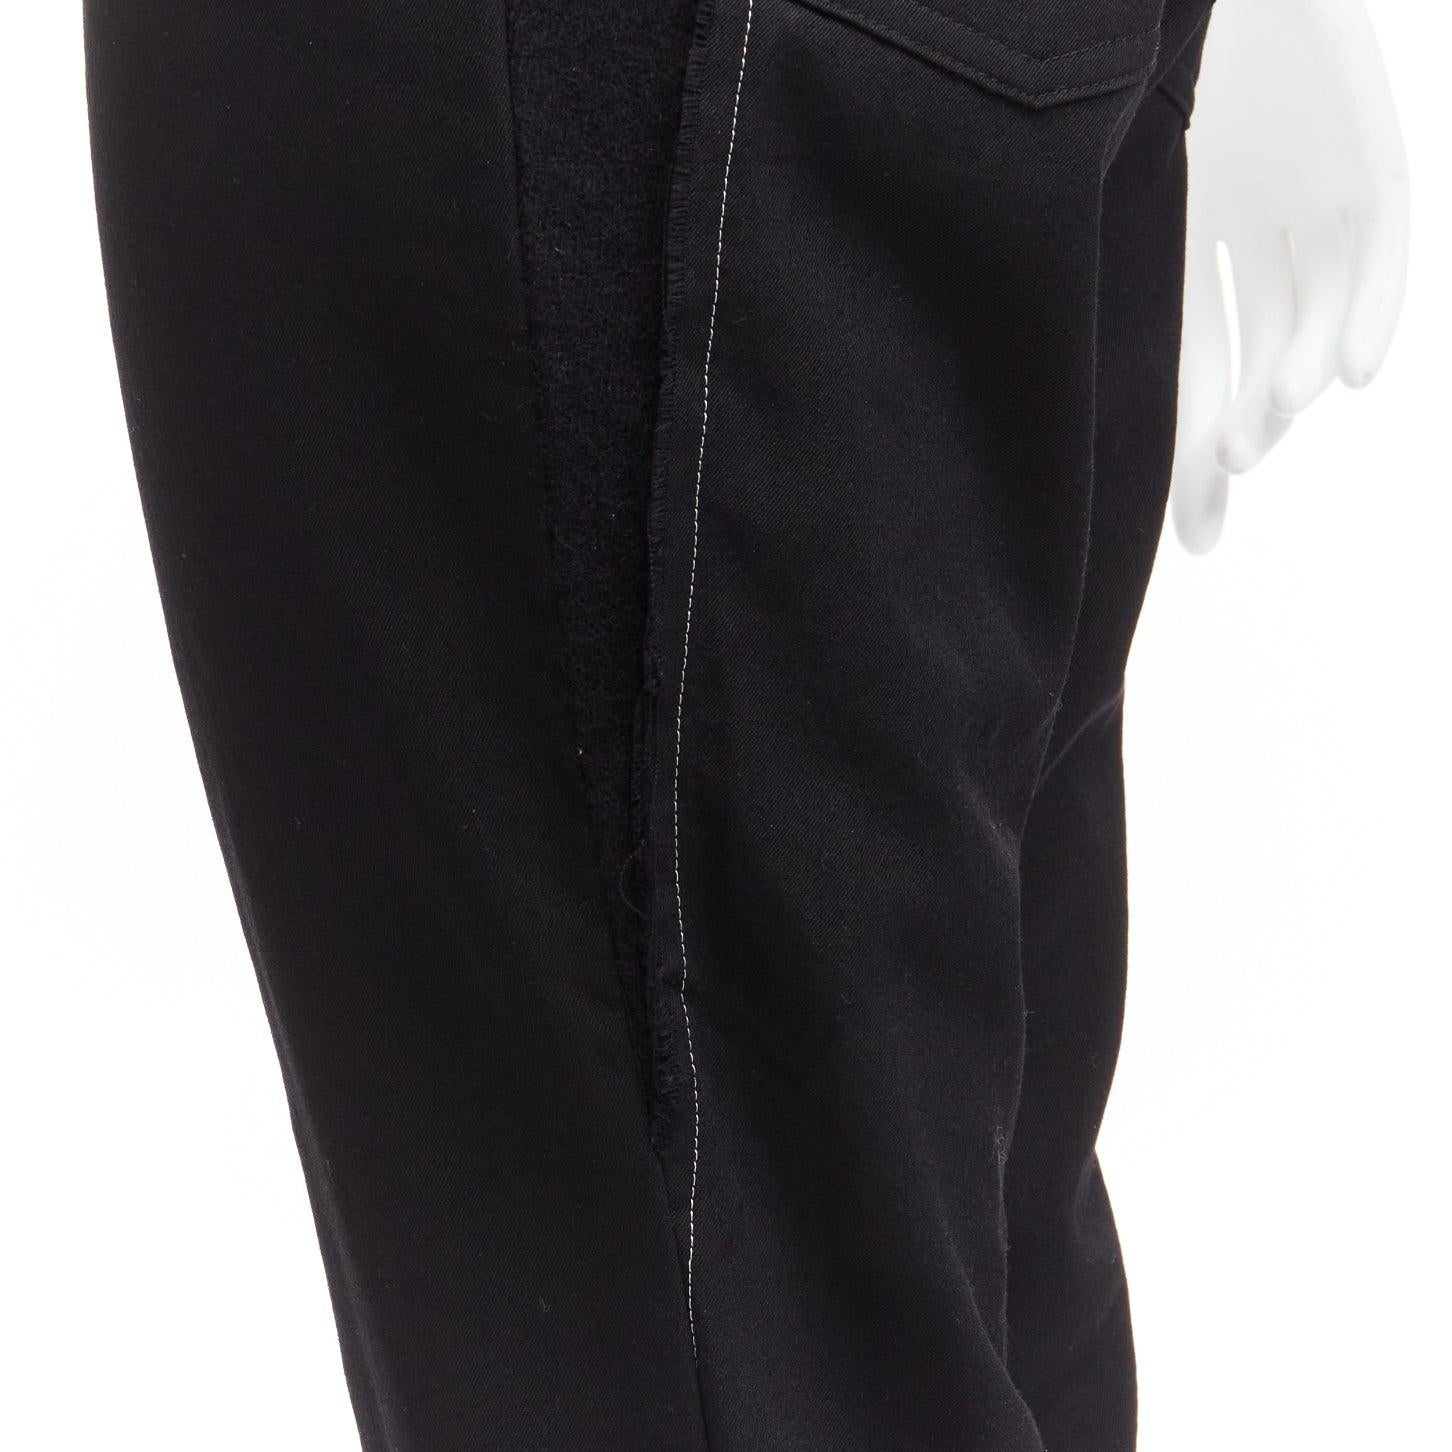 Y'S YOHJI YAMAMOTO 100% wool black insert panels white topstitch tapered pants JP2 M
Reference: CAWG/A00287
Brand: Yohji Yamamoto
Collection: Y'S
Material: Wool
Color: Black
Pattern: Solid
Closure: Zip Fly
Extra Details: Wool blend insert panels at